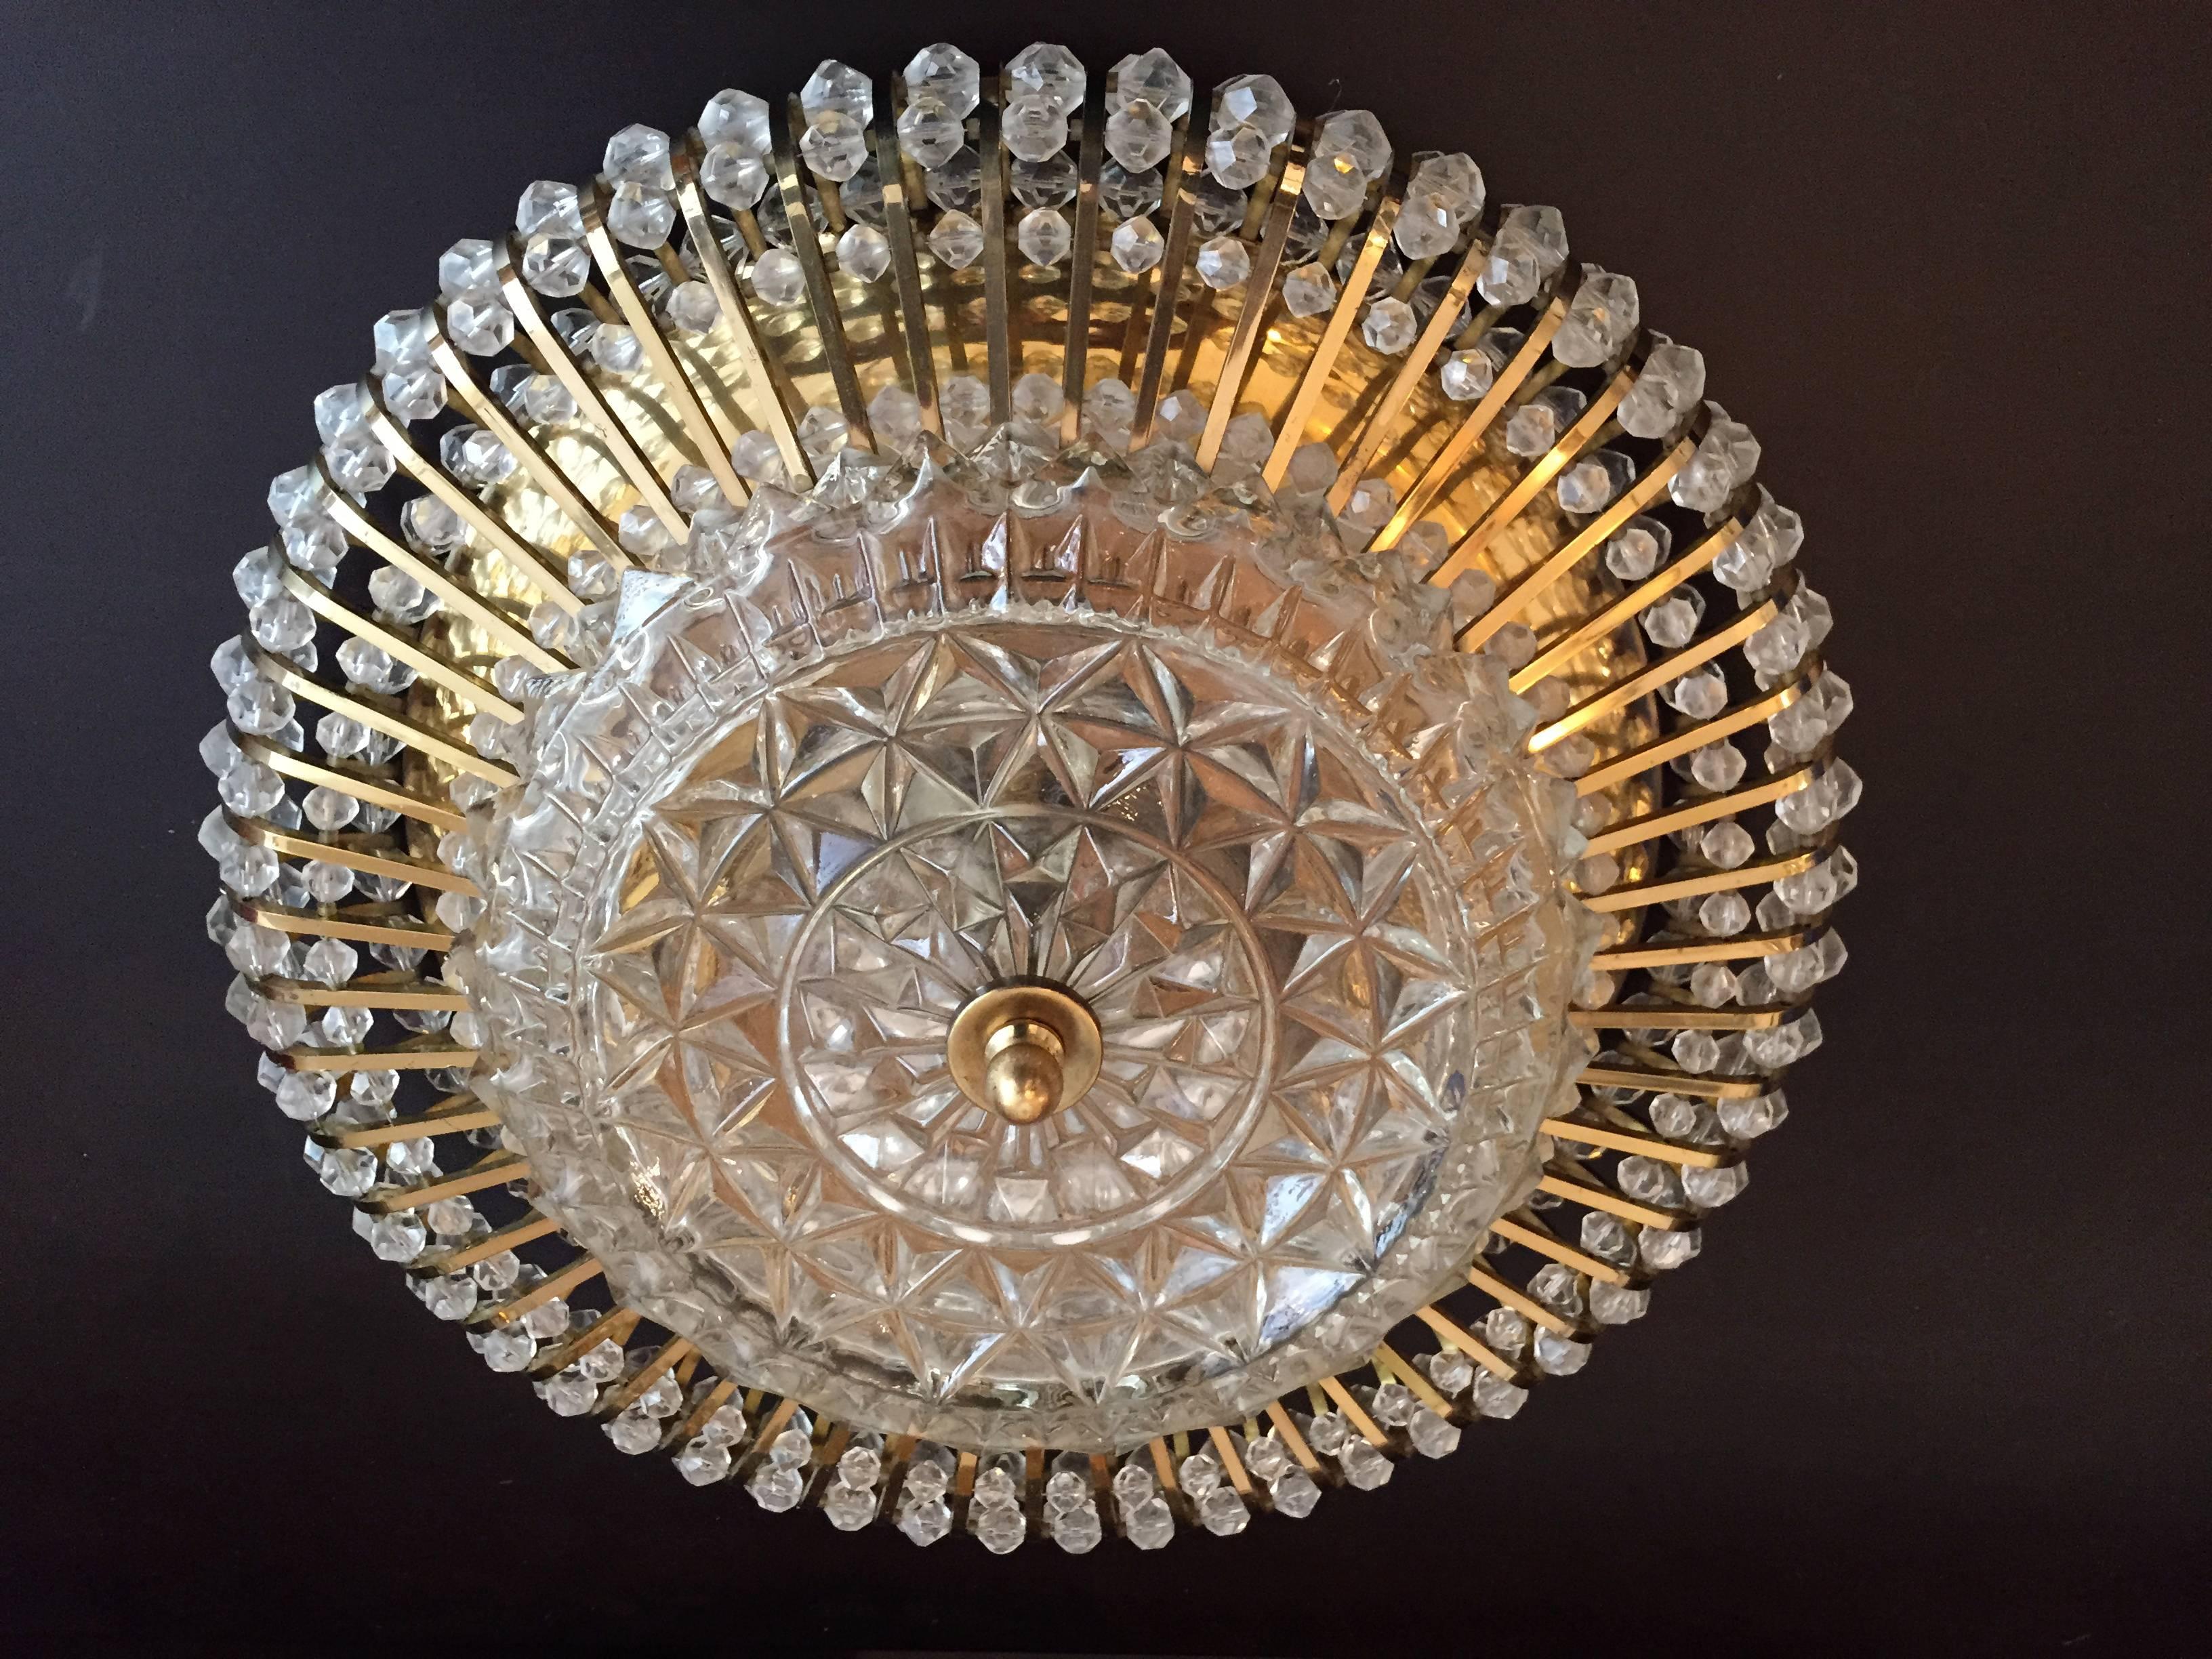 A great pair of 1950s Austrian flush ceiling lights composed of a golden brass fixtures and decorative crystal sand a cut-glass center shade. Three light sources each. Rewired.